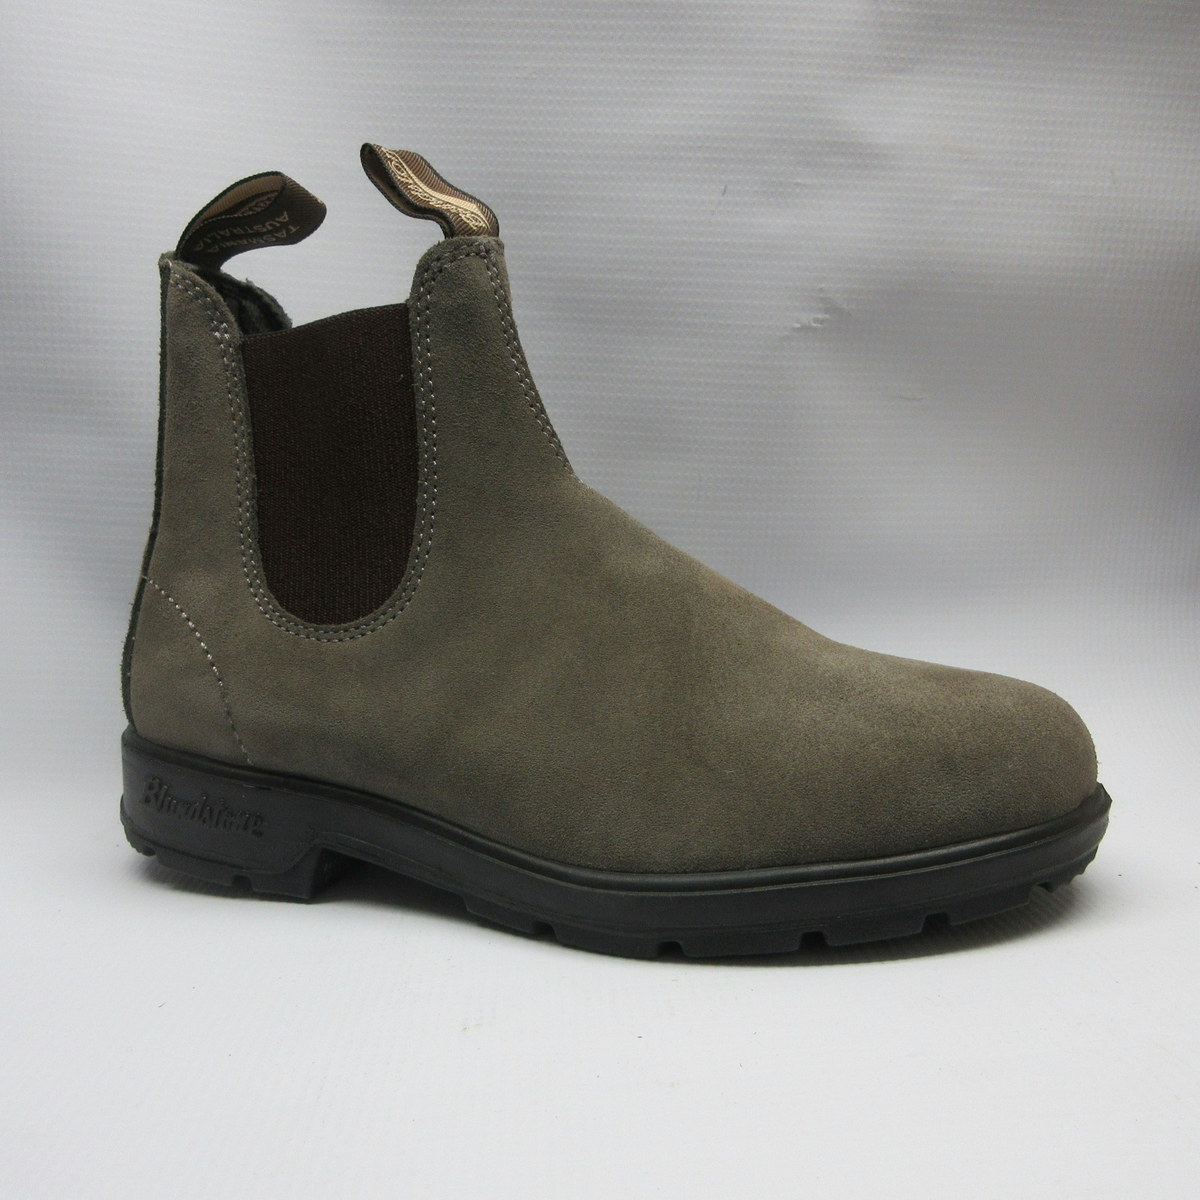 blundstone suede boots